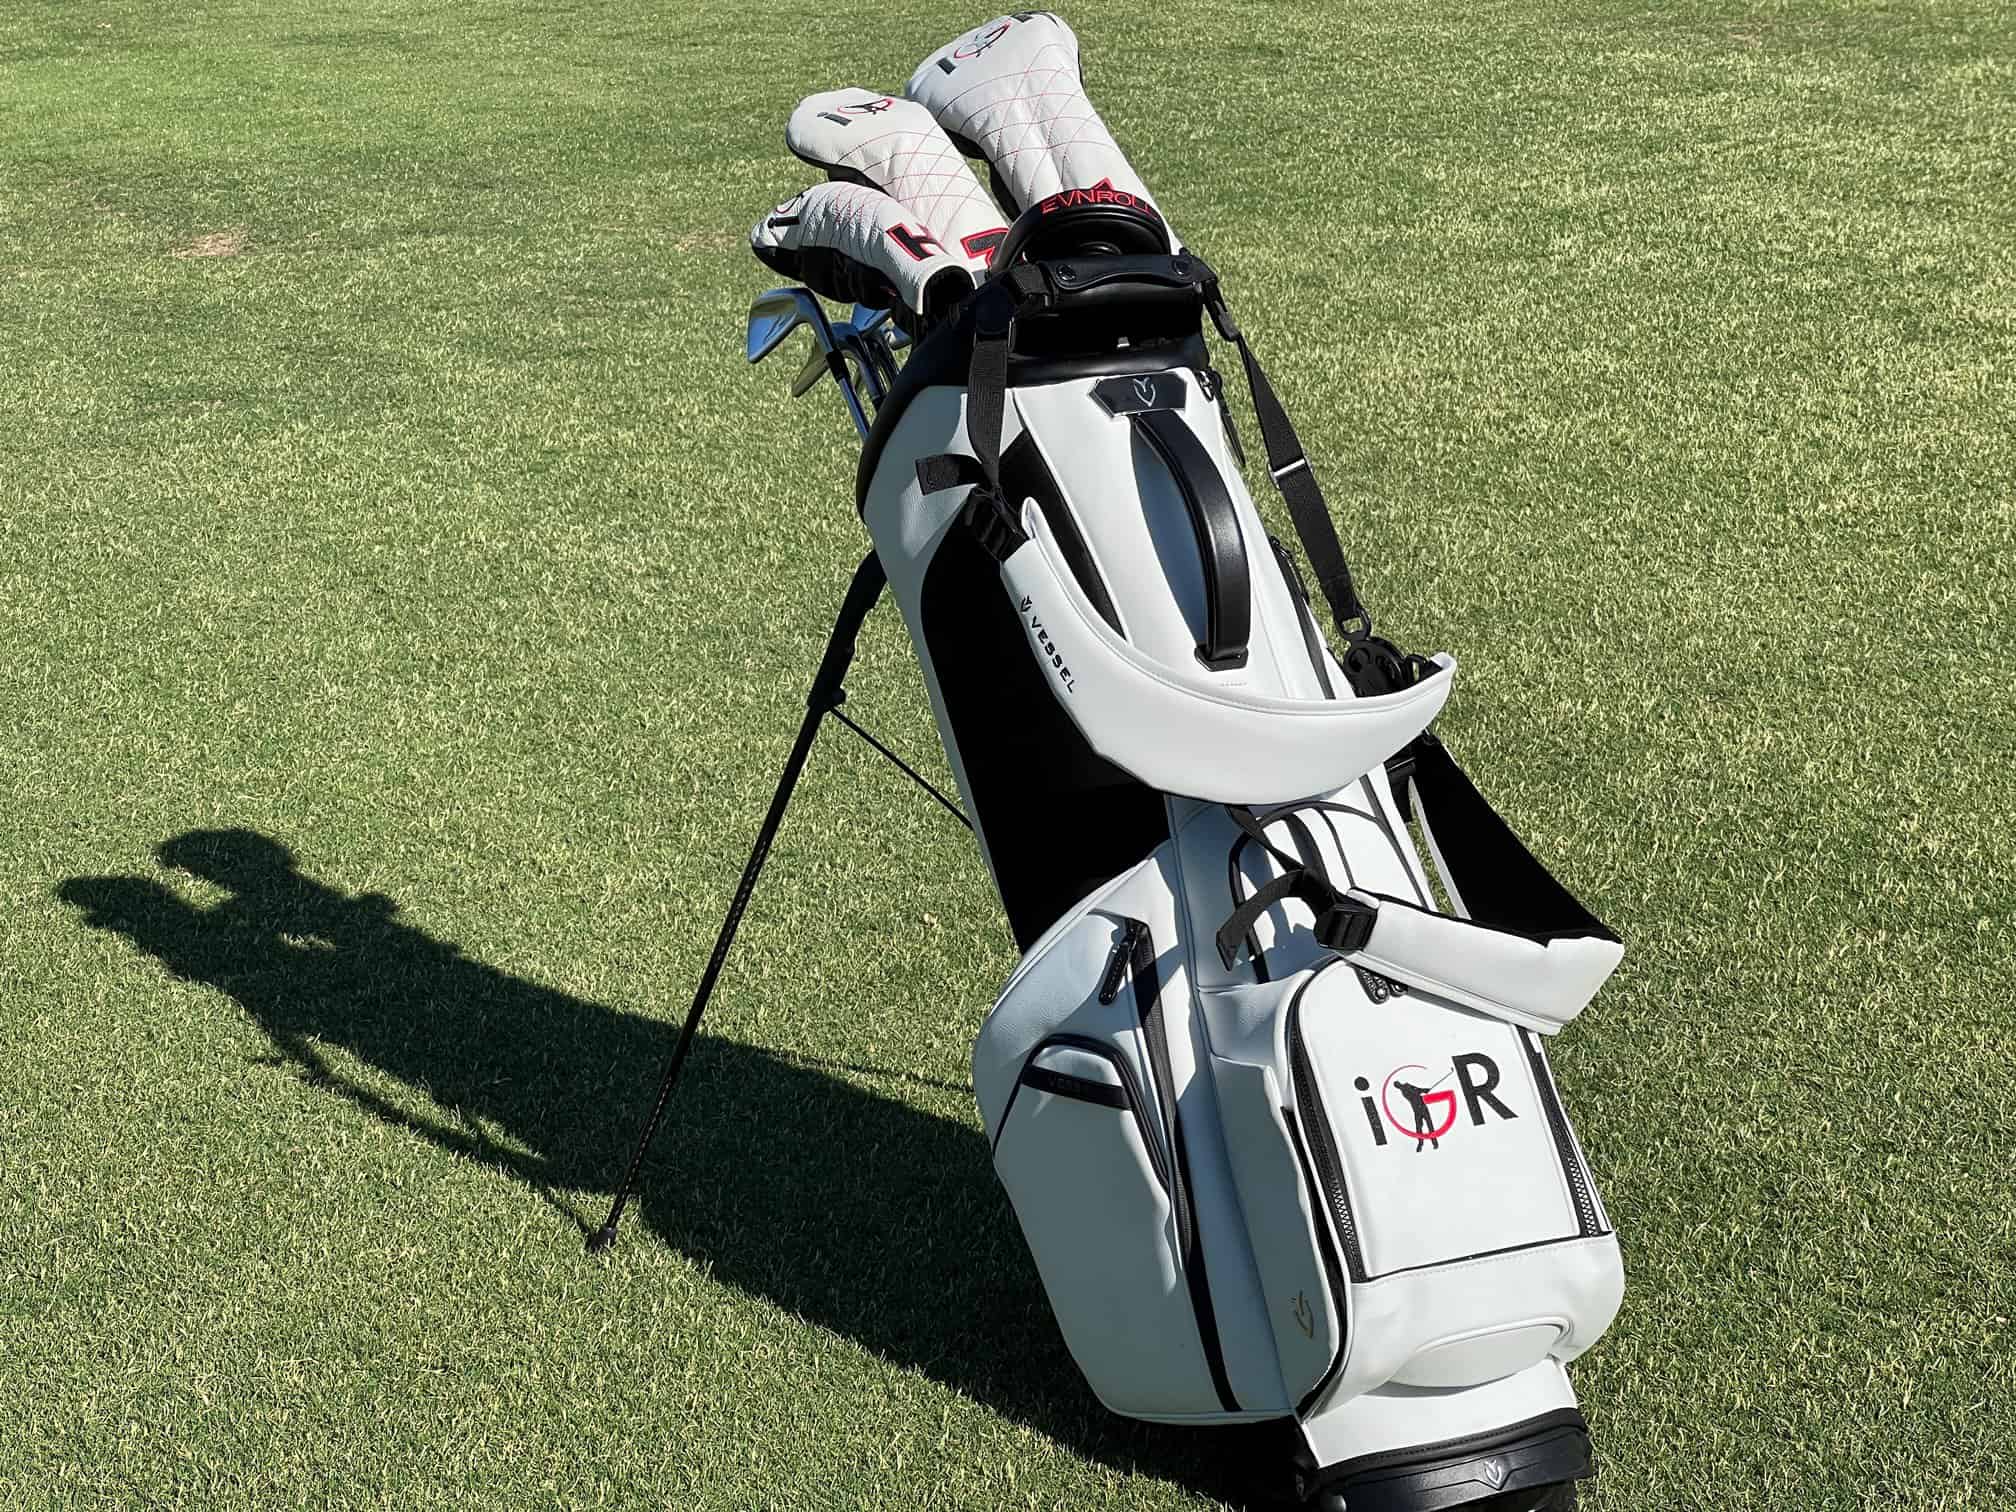 Vessel Player IV Golf Bag Review - Plugged In Golf